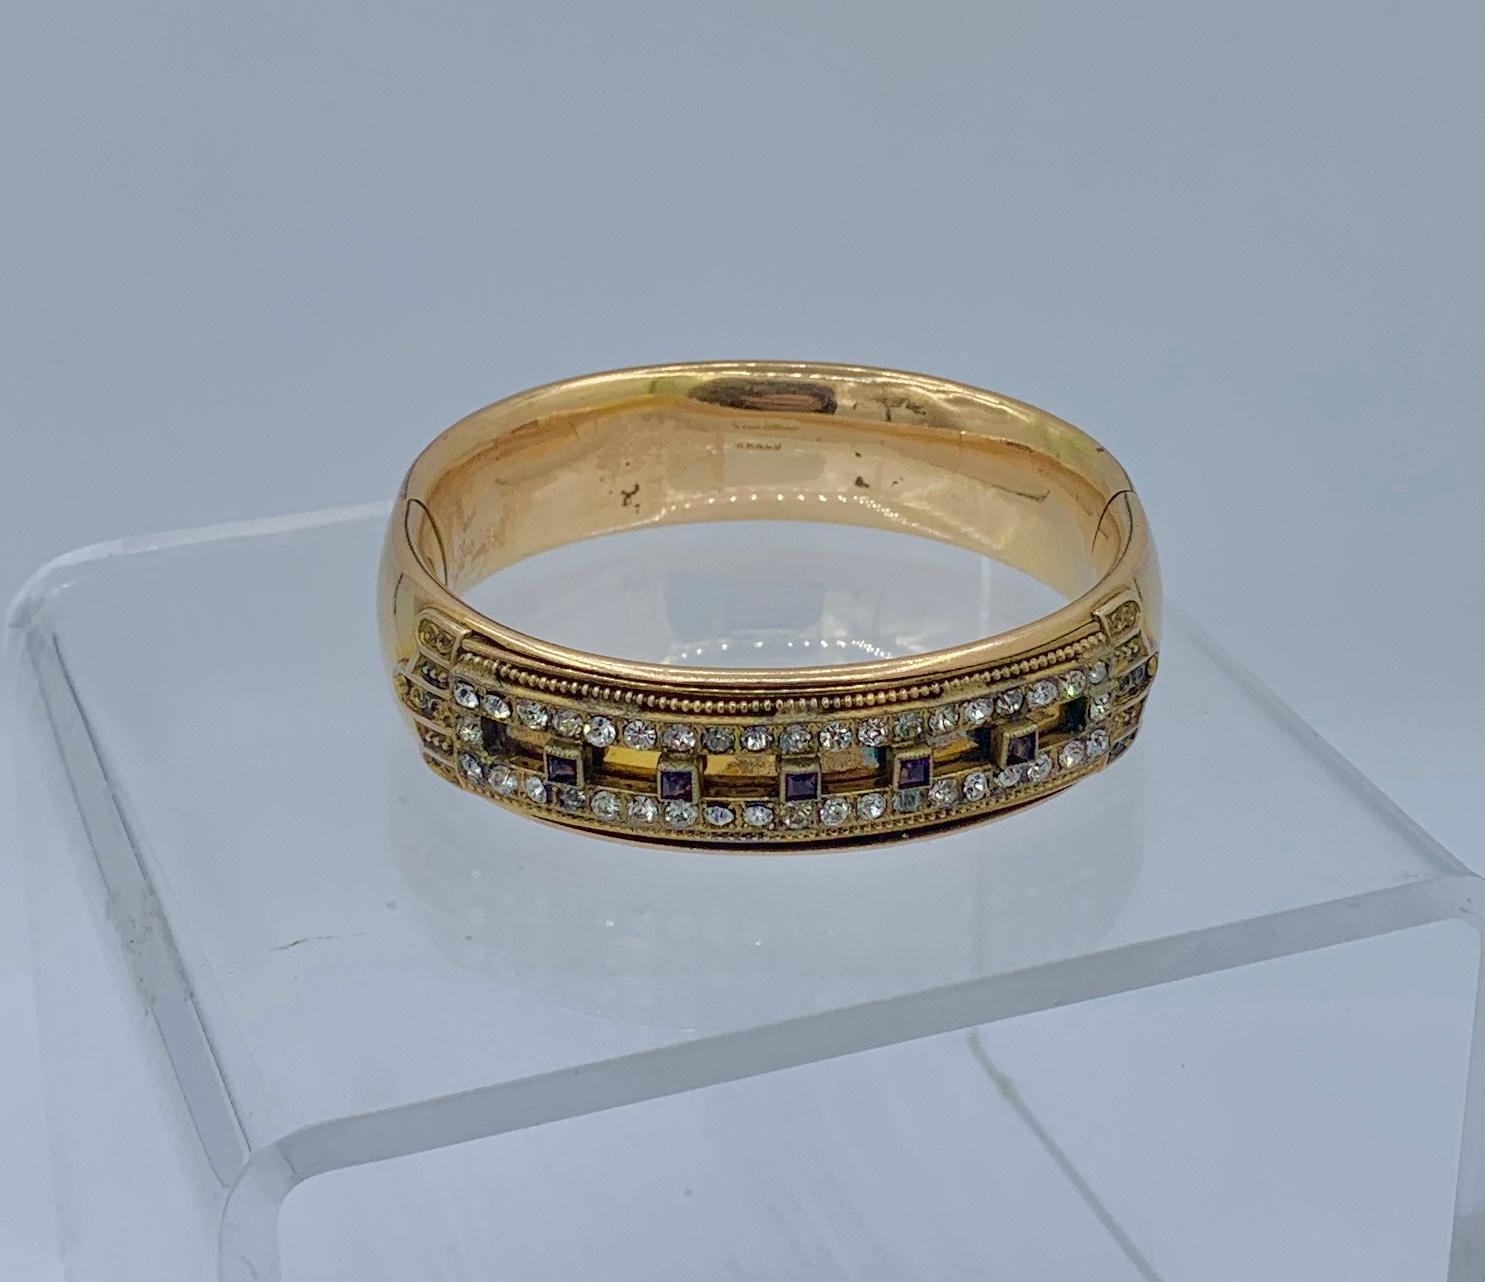 THIS IS A WONDERFUL ANTIQUE GOLD SHELL VICTORIAN - ART DECO BANGLE BRACELET MADE BY THE ESTEEMED JEWELERS MH & CO.  WITH EXQUISITE RHINESTONE AND AMETHYST PASTE GEMS IN A WONDERFUL ARCHITECTURAL DESIGN.  THIS IS A BEAUTIFULLY MADE HEAVY BRACELET IN